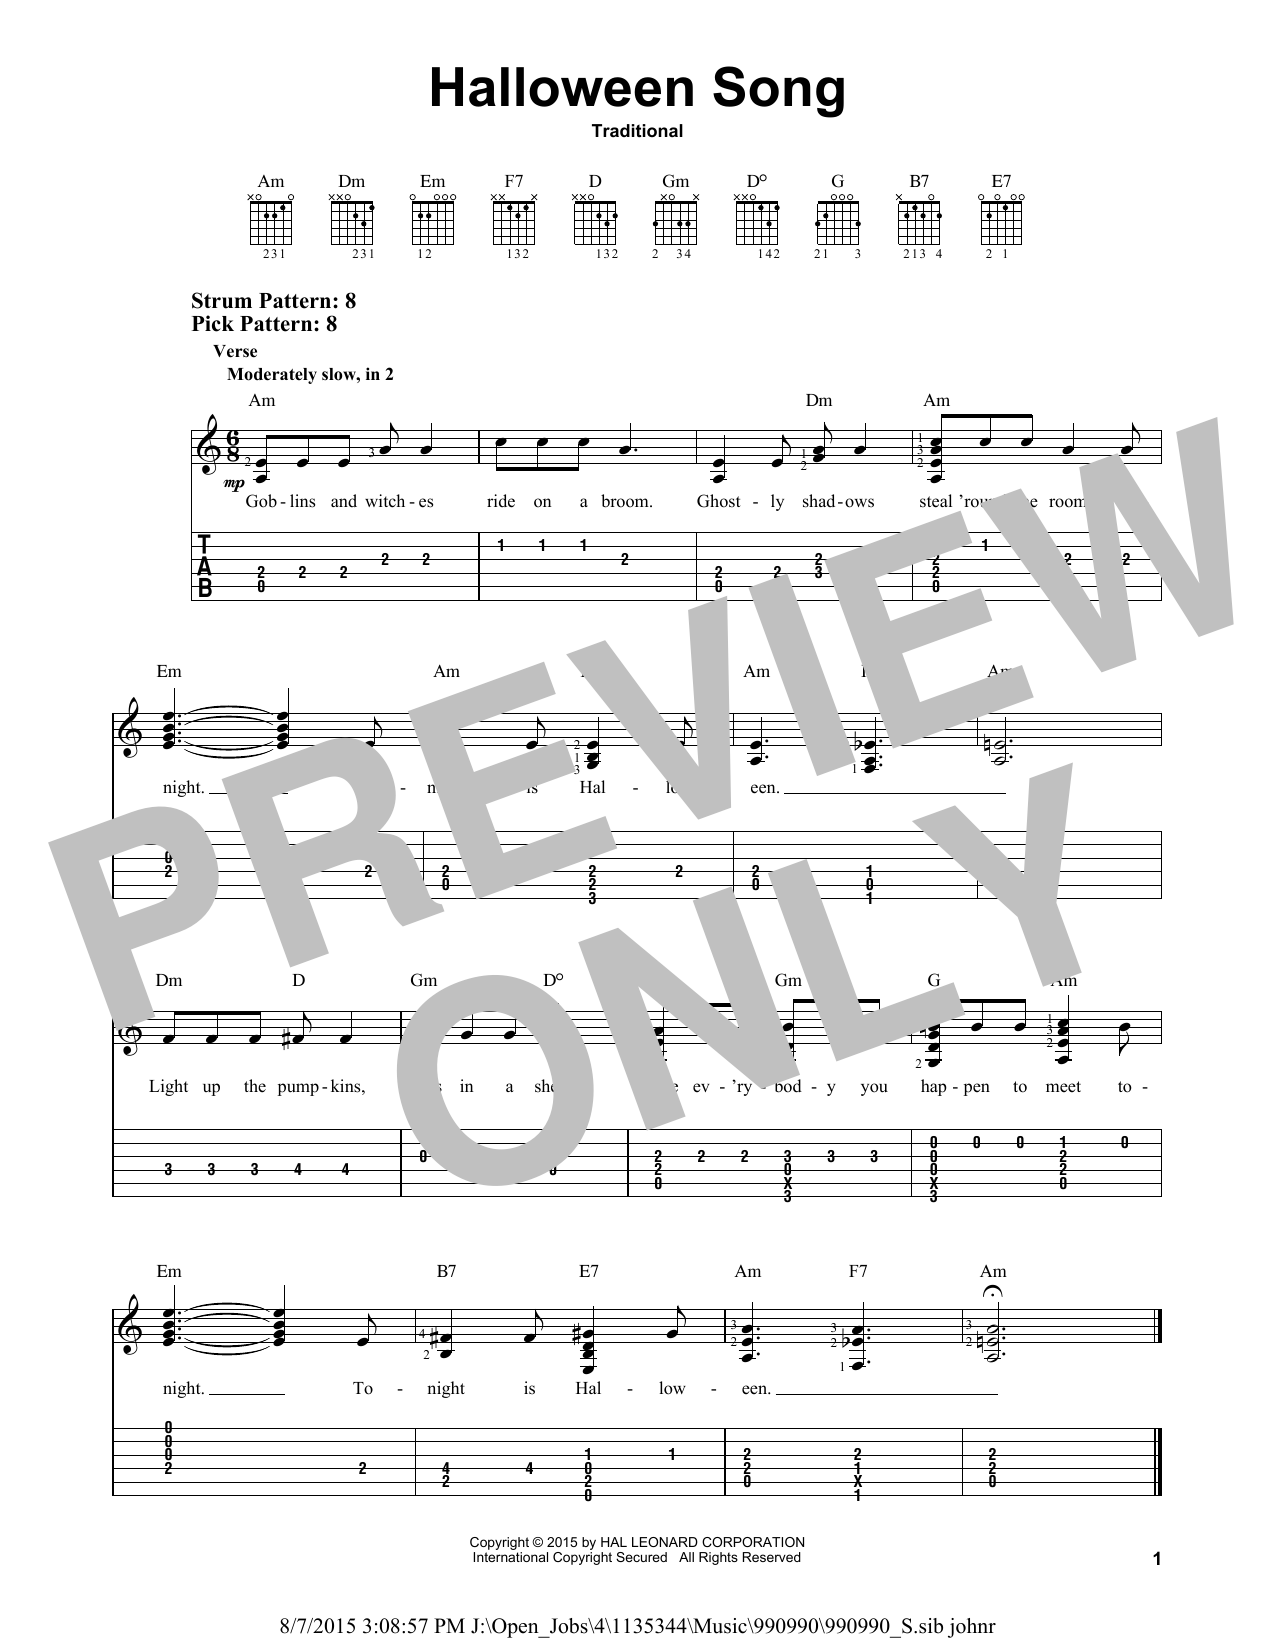 Download Traditional Halloween Song Sheet Music